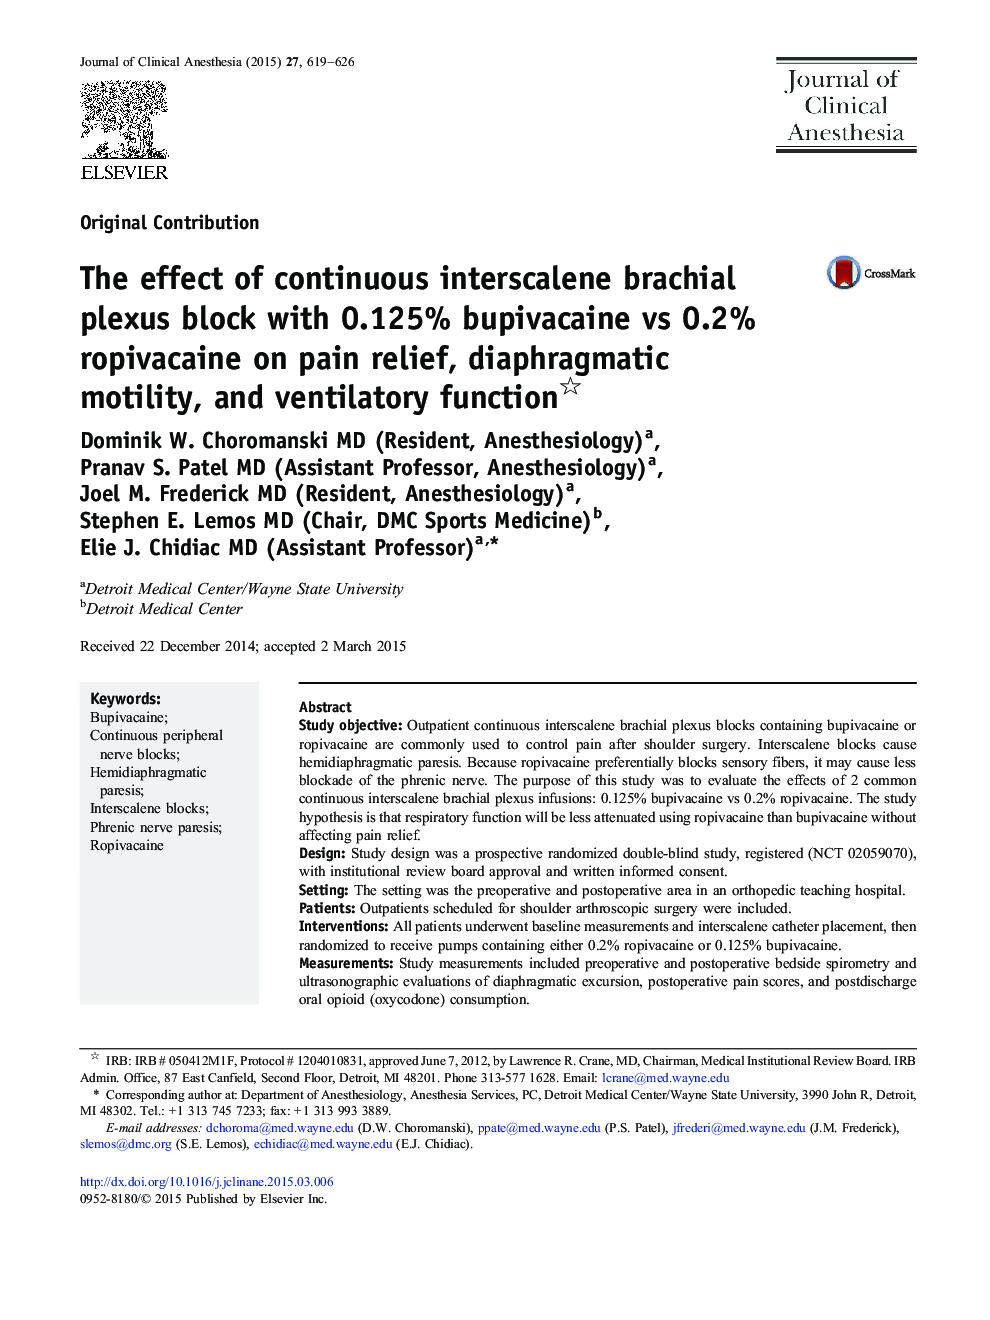 The effect of continuous interscalene brachial plexus block with 0.125% bupivacaine vs 0.2% ropivacaine on pain relief, diaphragmatic motility, and ventilatory function 